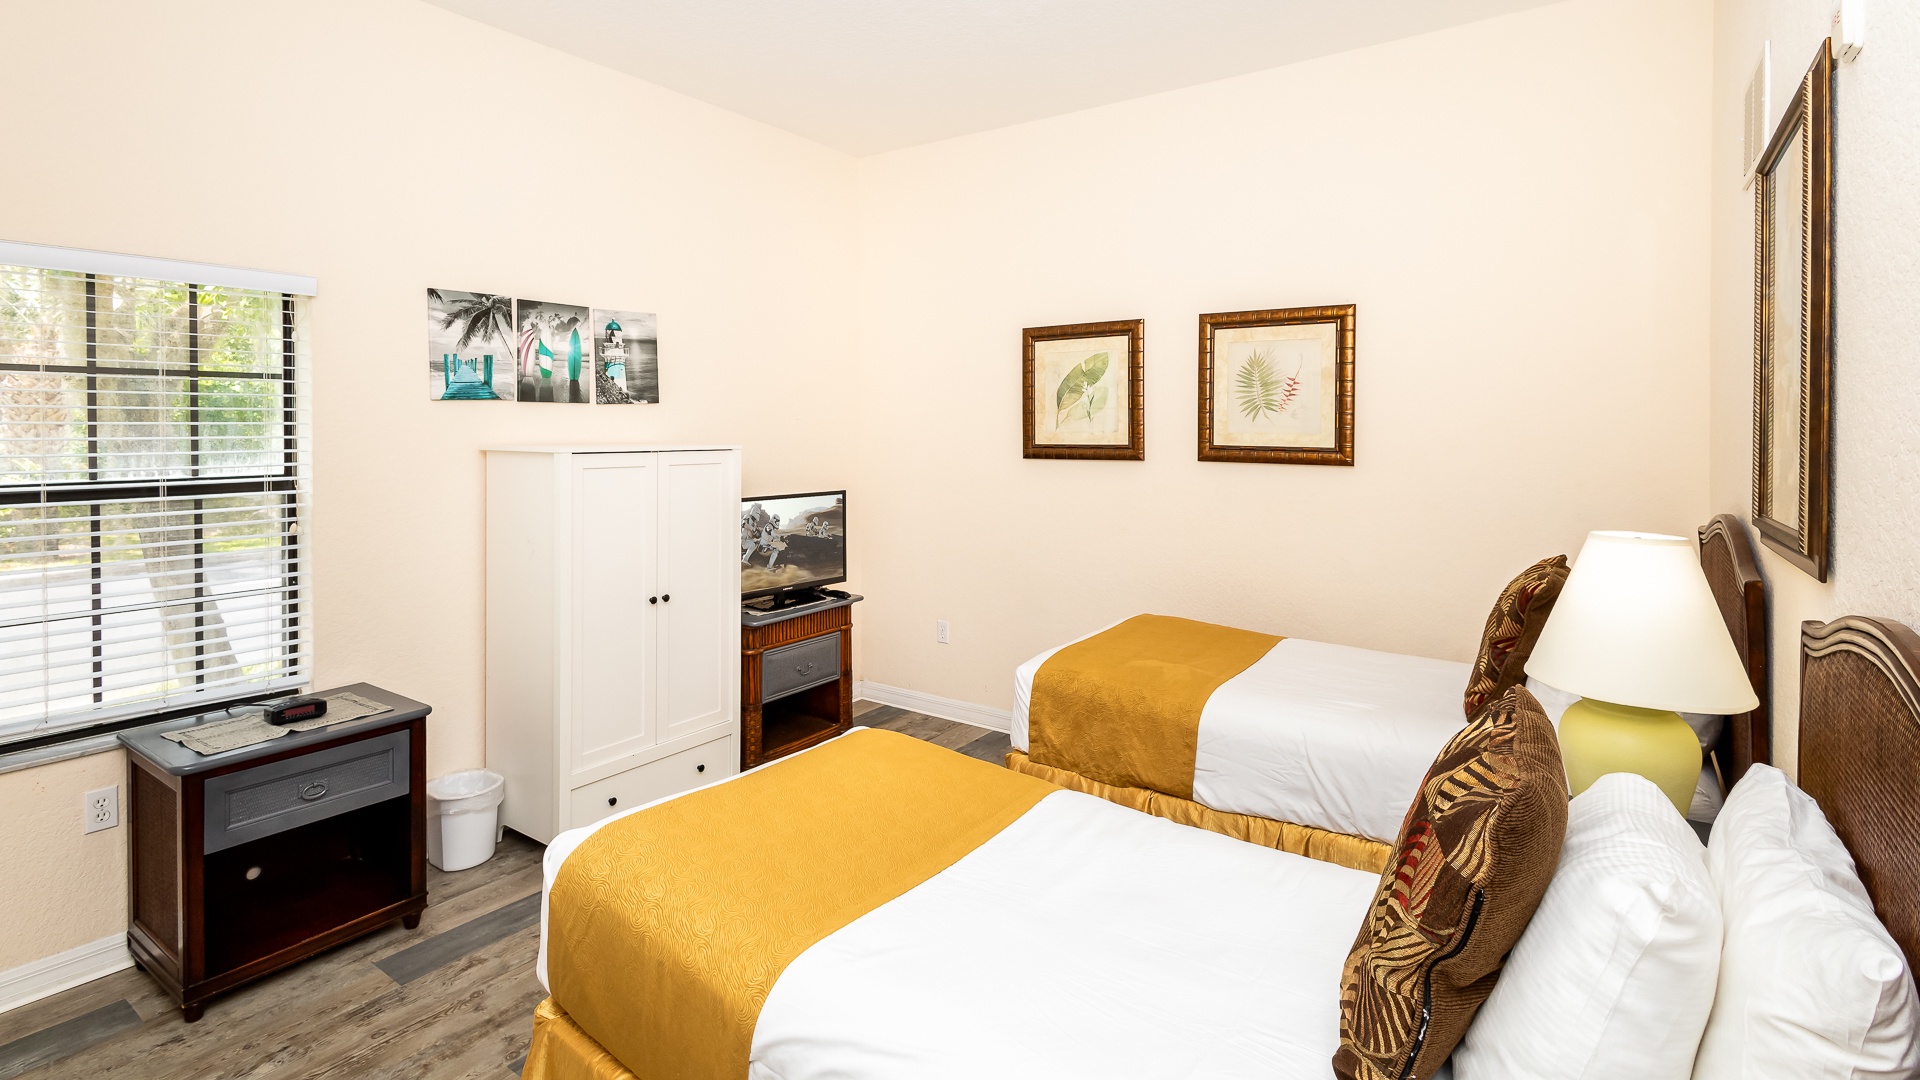 Unwind in the second bedroom, complete with 2 twin beds, ensuite & TV